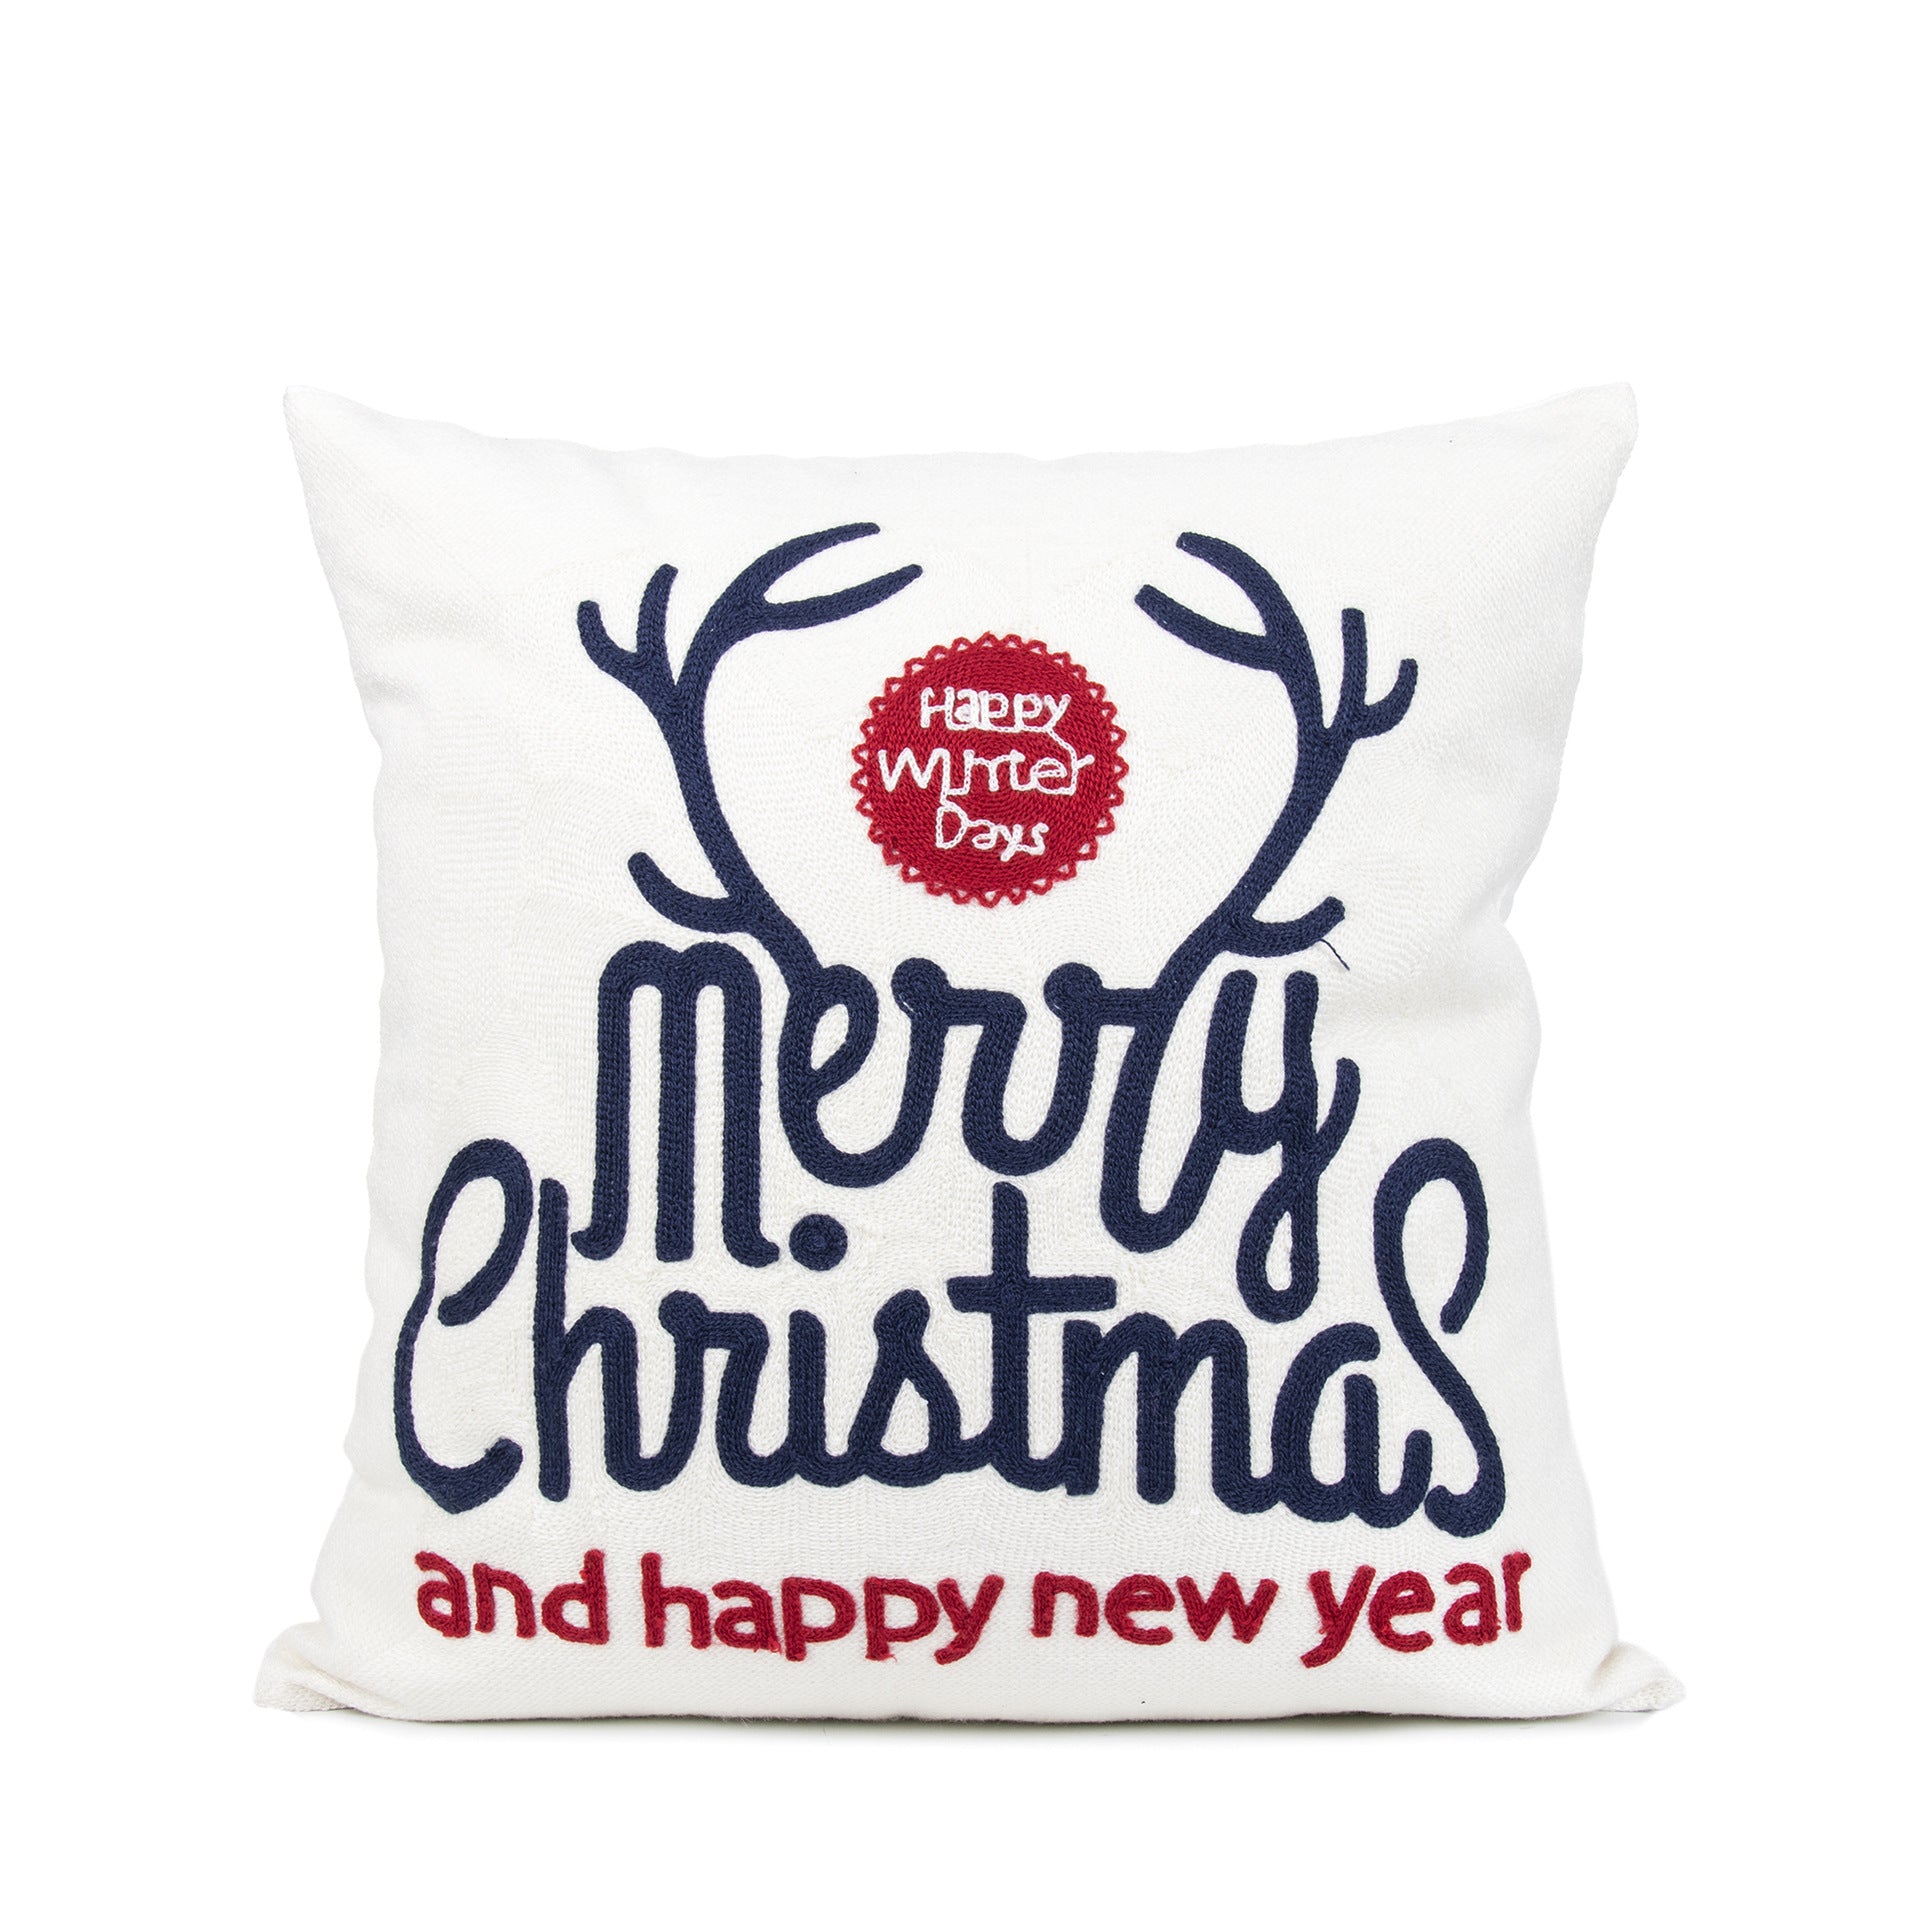 Household Supplies New Christmas Embroidery Pillow Case